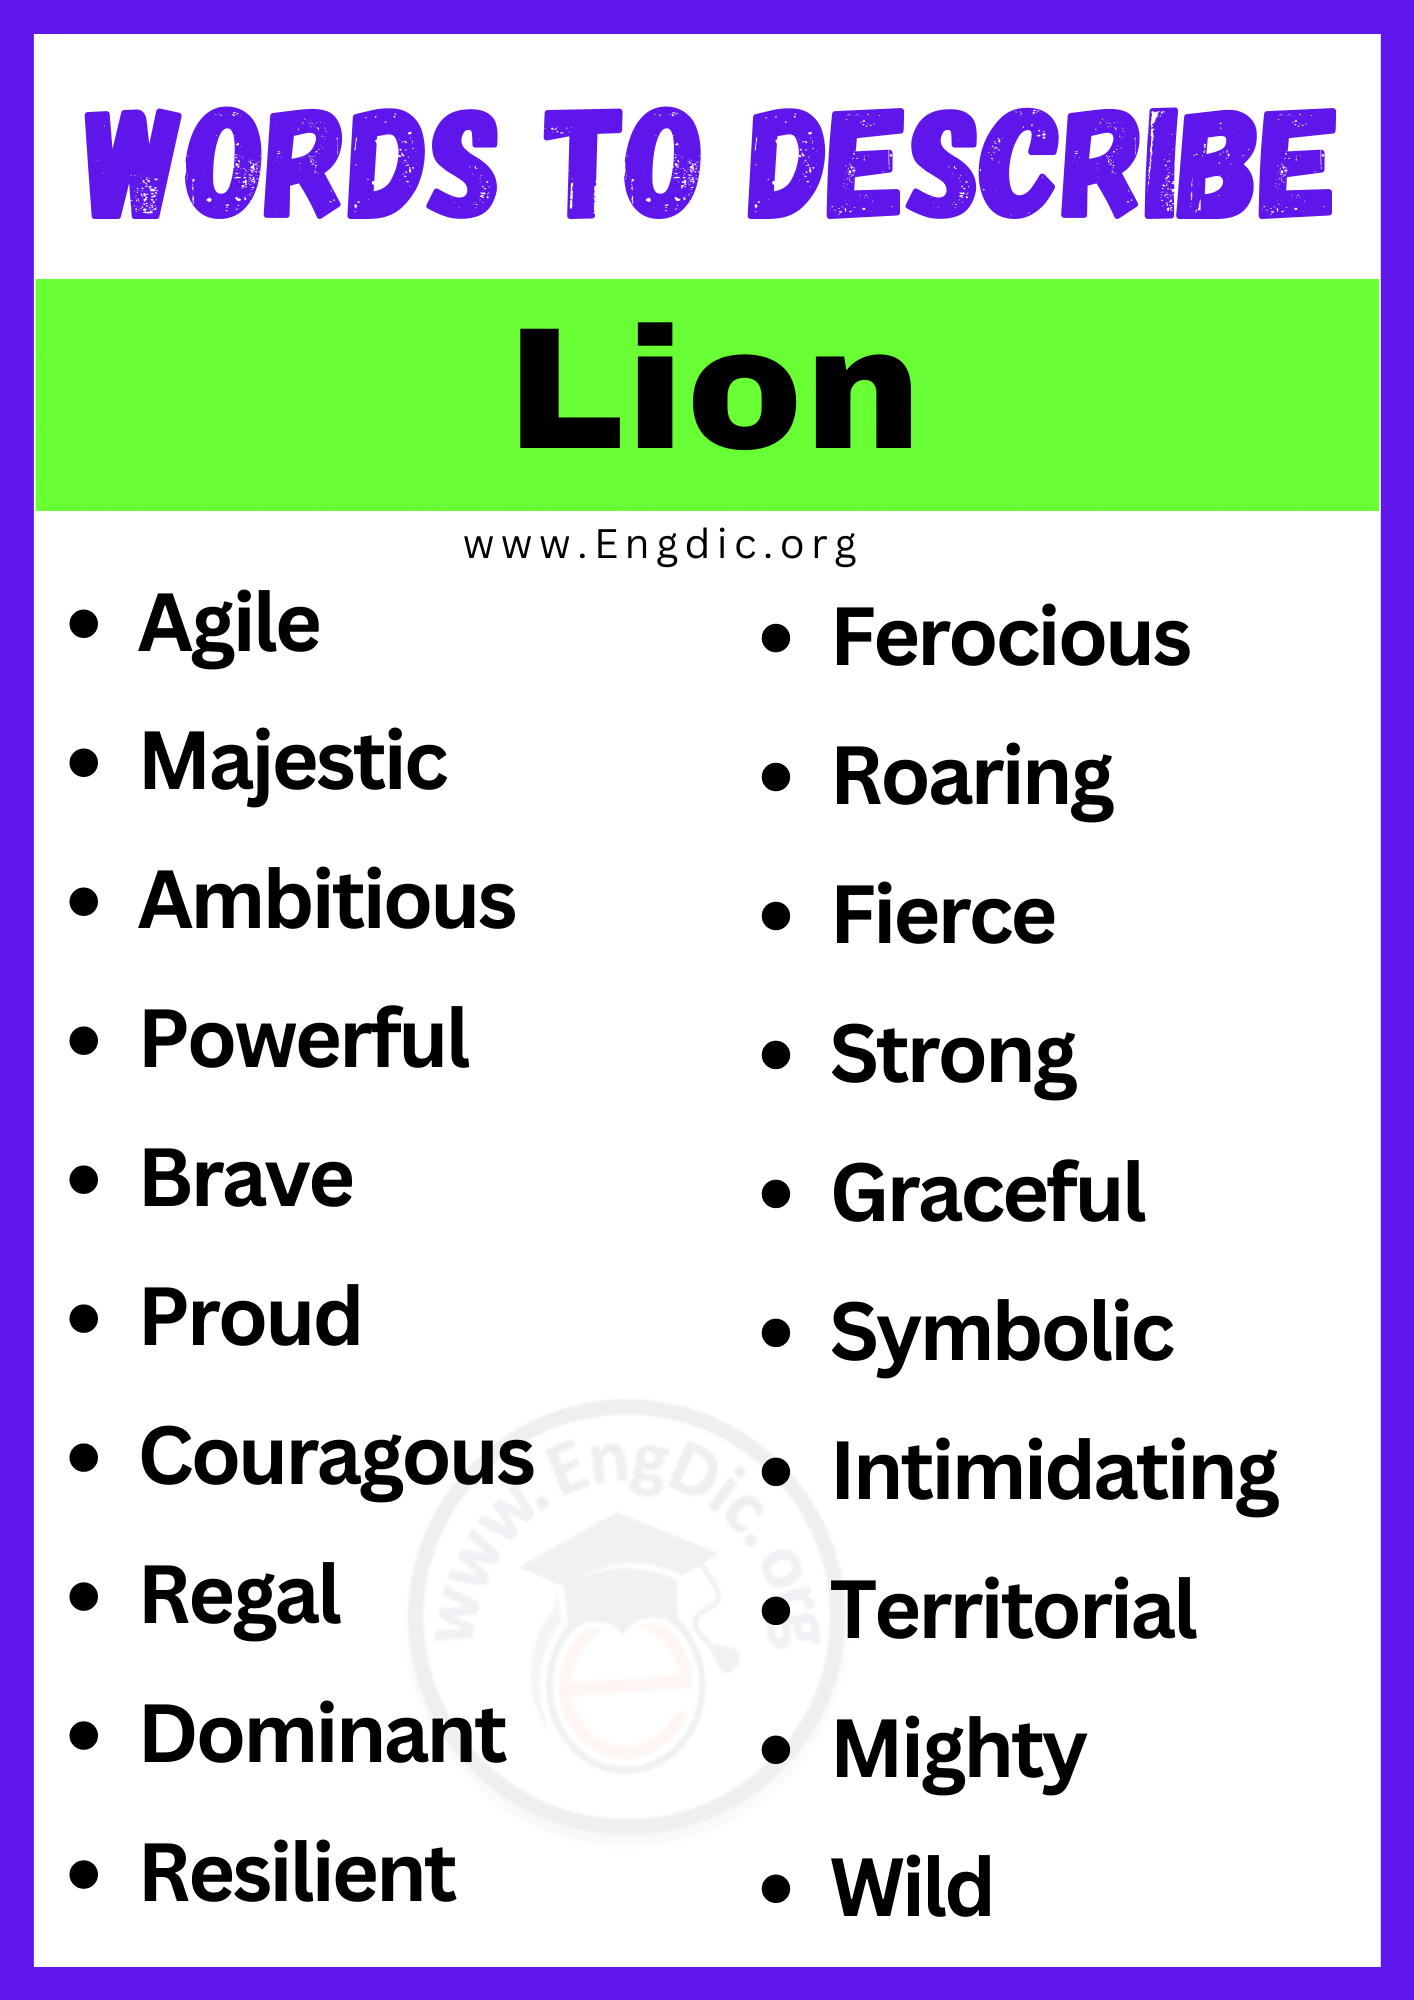 Words to Describe Lion